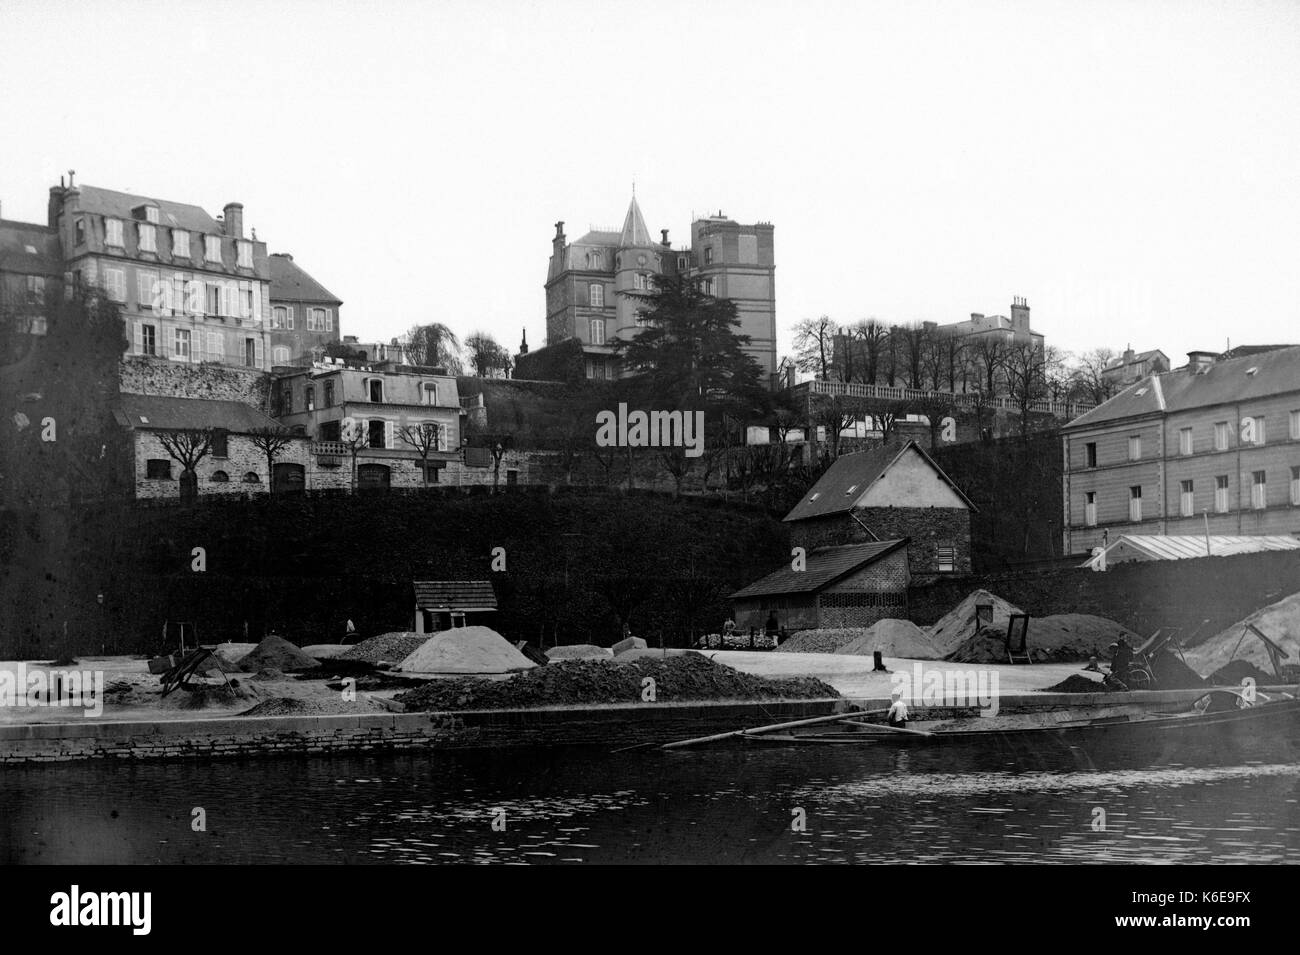 AJAXNETPHOTO. 1891-1910 (APPROX). SAINT LO, FRANCE. - RESIDENTIAL BUILDINGS OVERLOOKING LA VIRE RIVER AGGREGATE DEPOT WITH BARGE LOADING. PHOTOGRAPHER:UNKNOWN © DIGITAL IMAGE COPYRIGHT AJAX VINTAGE PICTURE LIBRARY SOURCE: AJAX VINTAGE PICTURE LIBRARY COLLECTION REF:AVL FRA 1890 13 Stock Photo